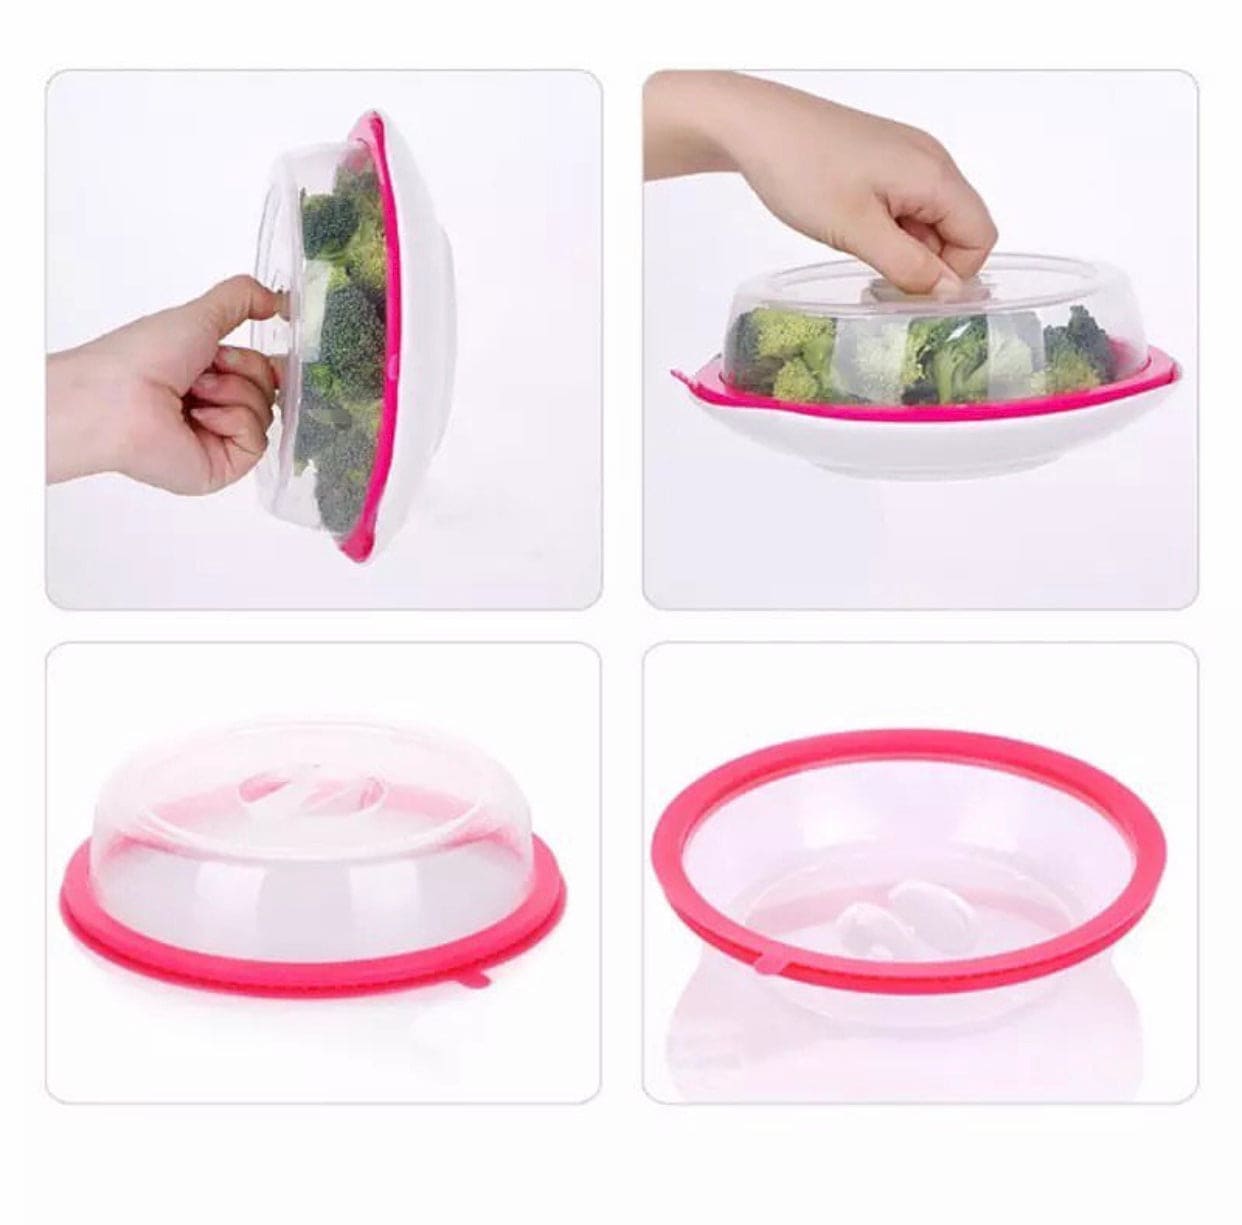 Silicone Microwave Bowl Cover, Silicone Fresh-Keeping Microwave Bowl Cover With Oil Proof Sealing, Anti-mosquito Breathable Dining Table Lid, Microwave Silicone Plate Cover Lid